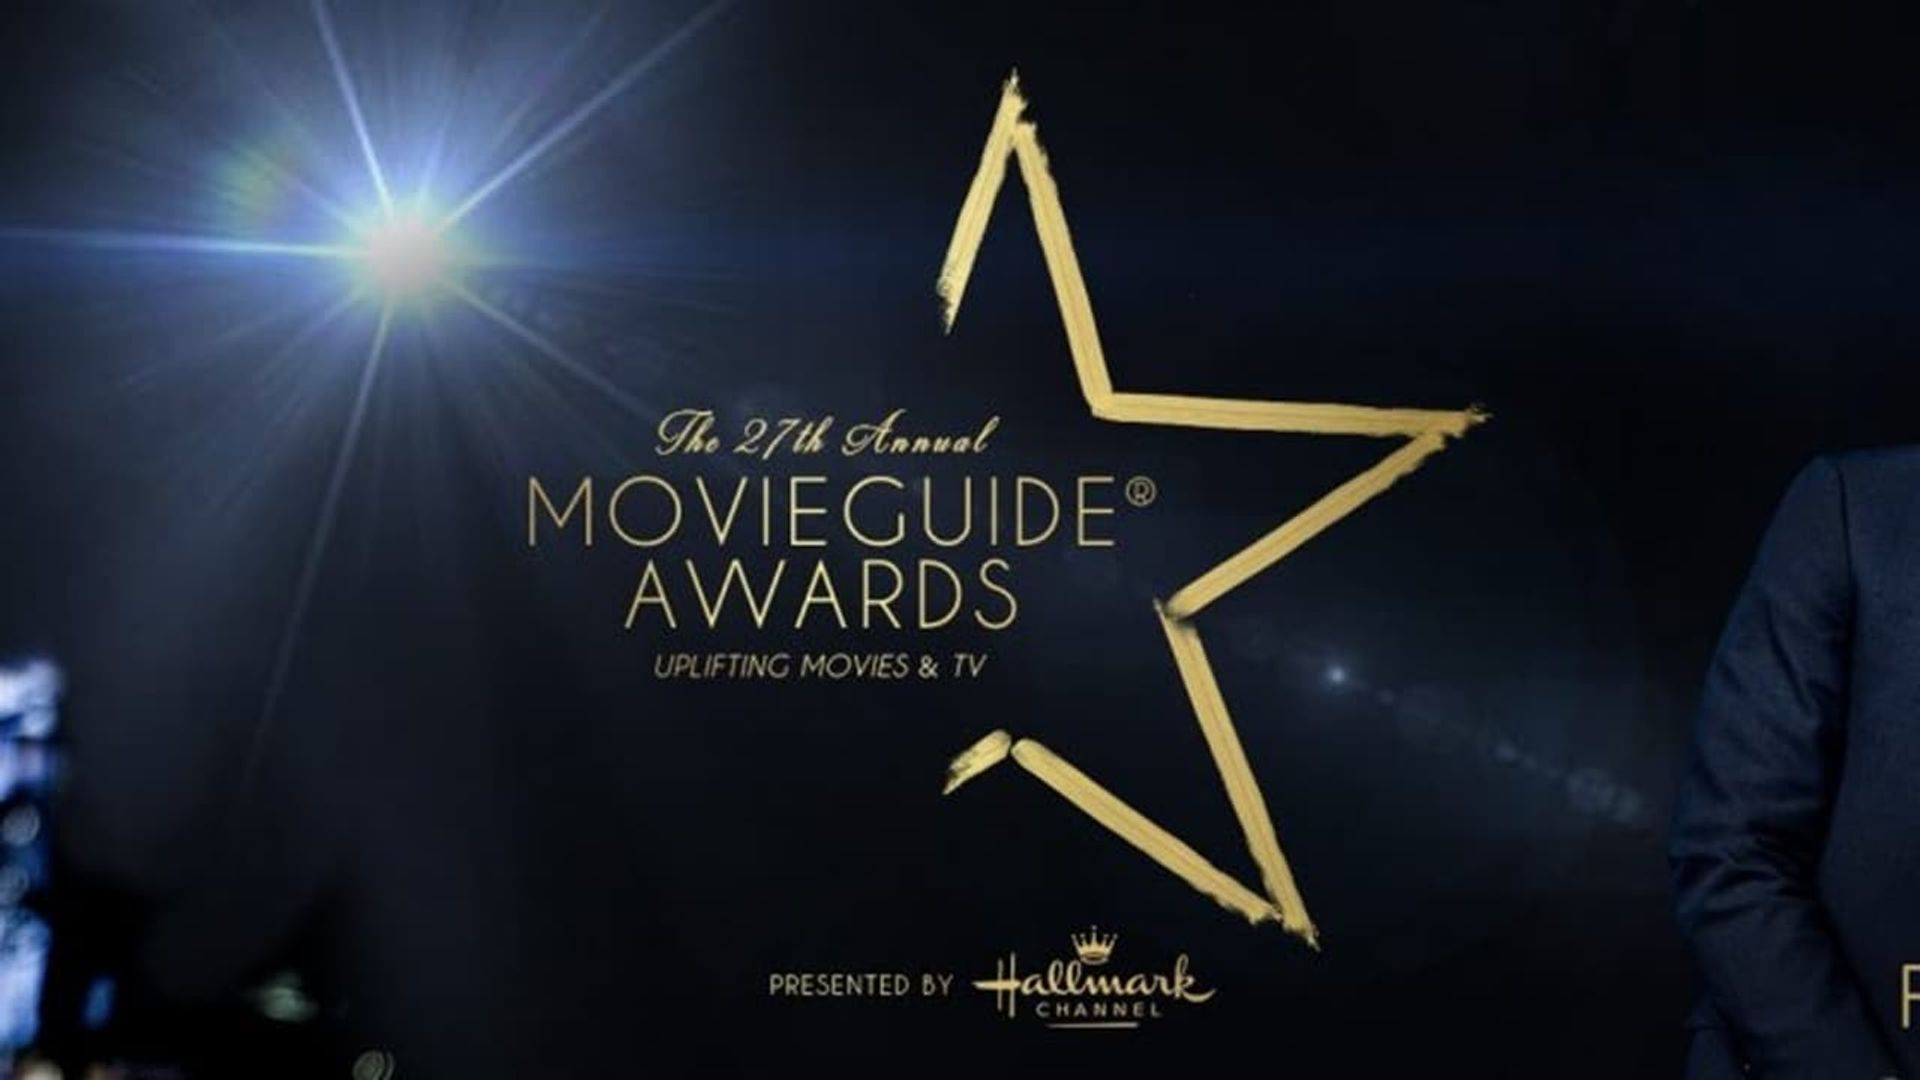 The 27th Annual Movieguide Awards background